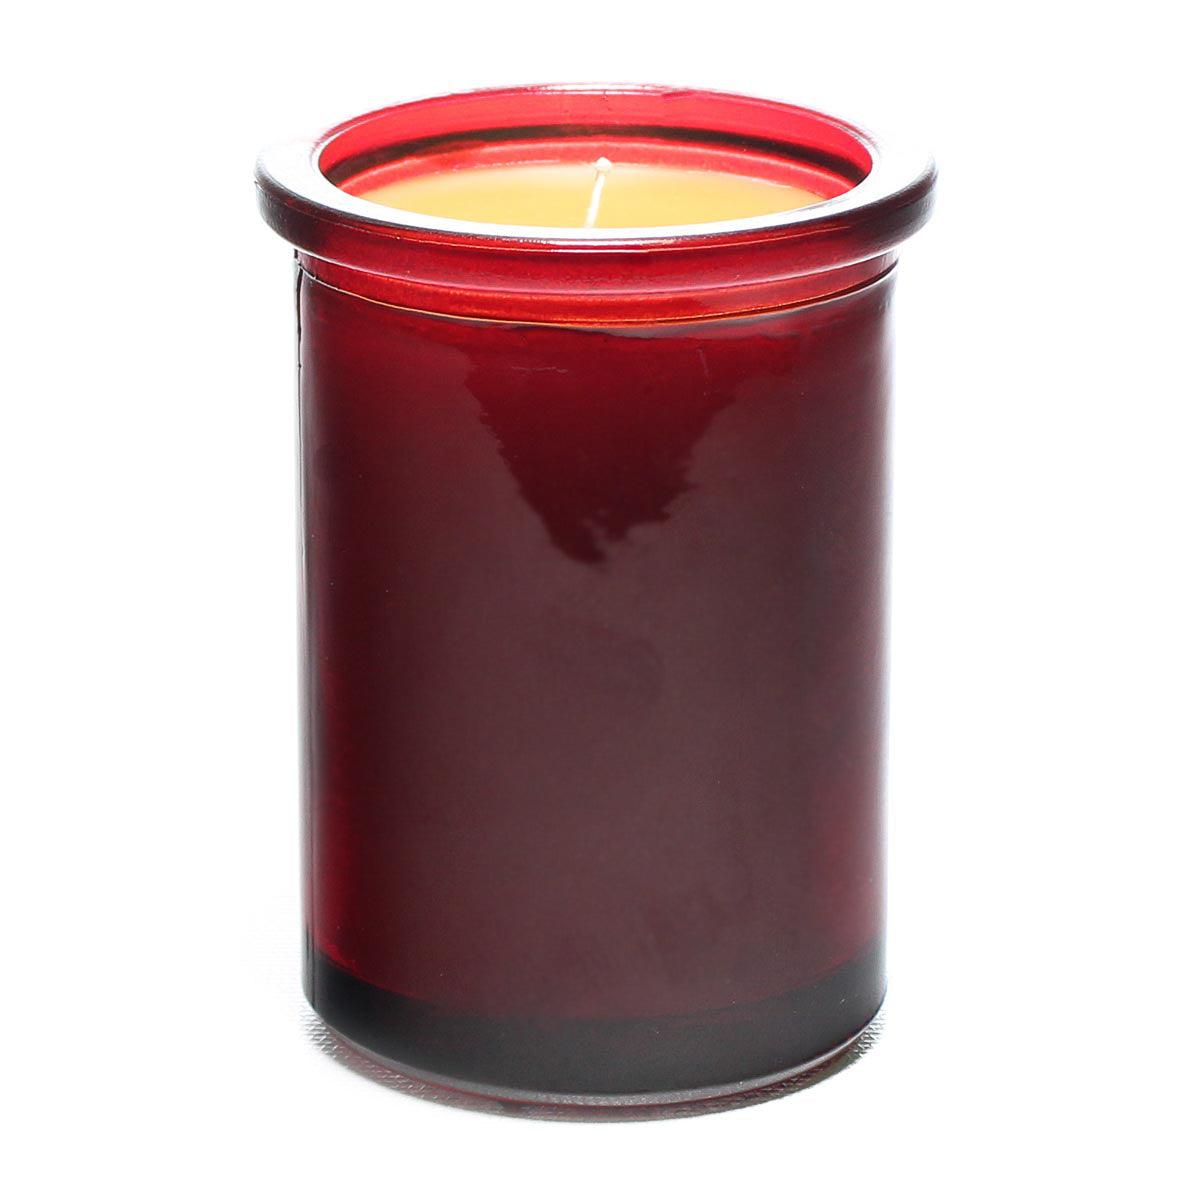 Bluecorn Beeswax 100% Pure Beeswax Red 6oz Glass Candle. Burn Time: 35 hours. Wax is golden in color with a light honey scent. Made with 100% Pure Beeswax and a 100% pure cotton wick, no lead. Candles are paraffin free, clean burning and non-toxic. Features 6oz candle with Bluecorn Beeswax hang tag printed on white 100% recyled paper with gold foil. For best burn, burn candle until wax pool reaches glass wall and trim wick to 1/4 before lighting.